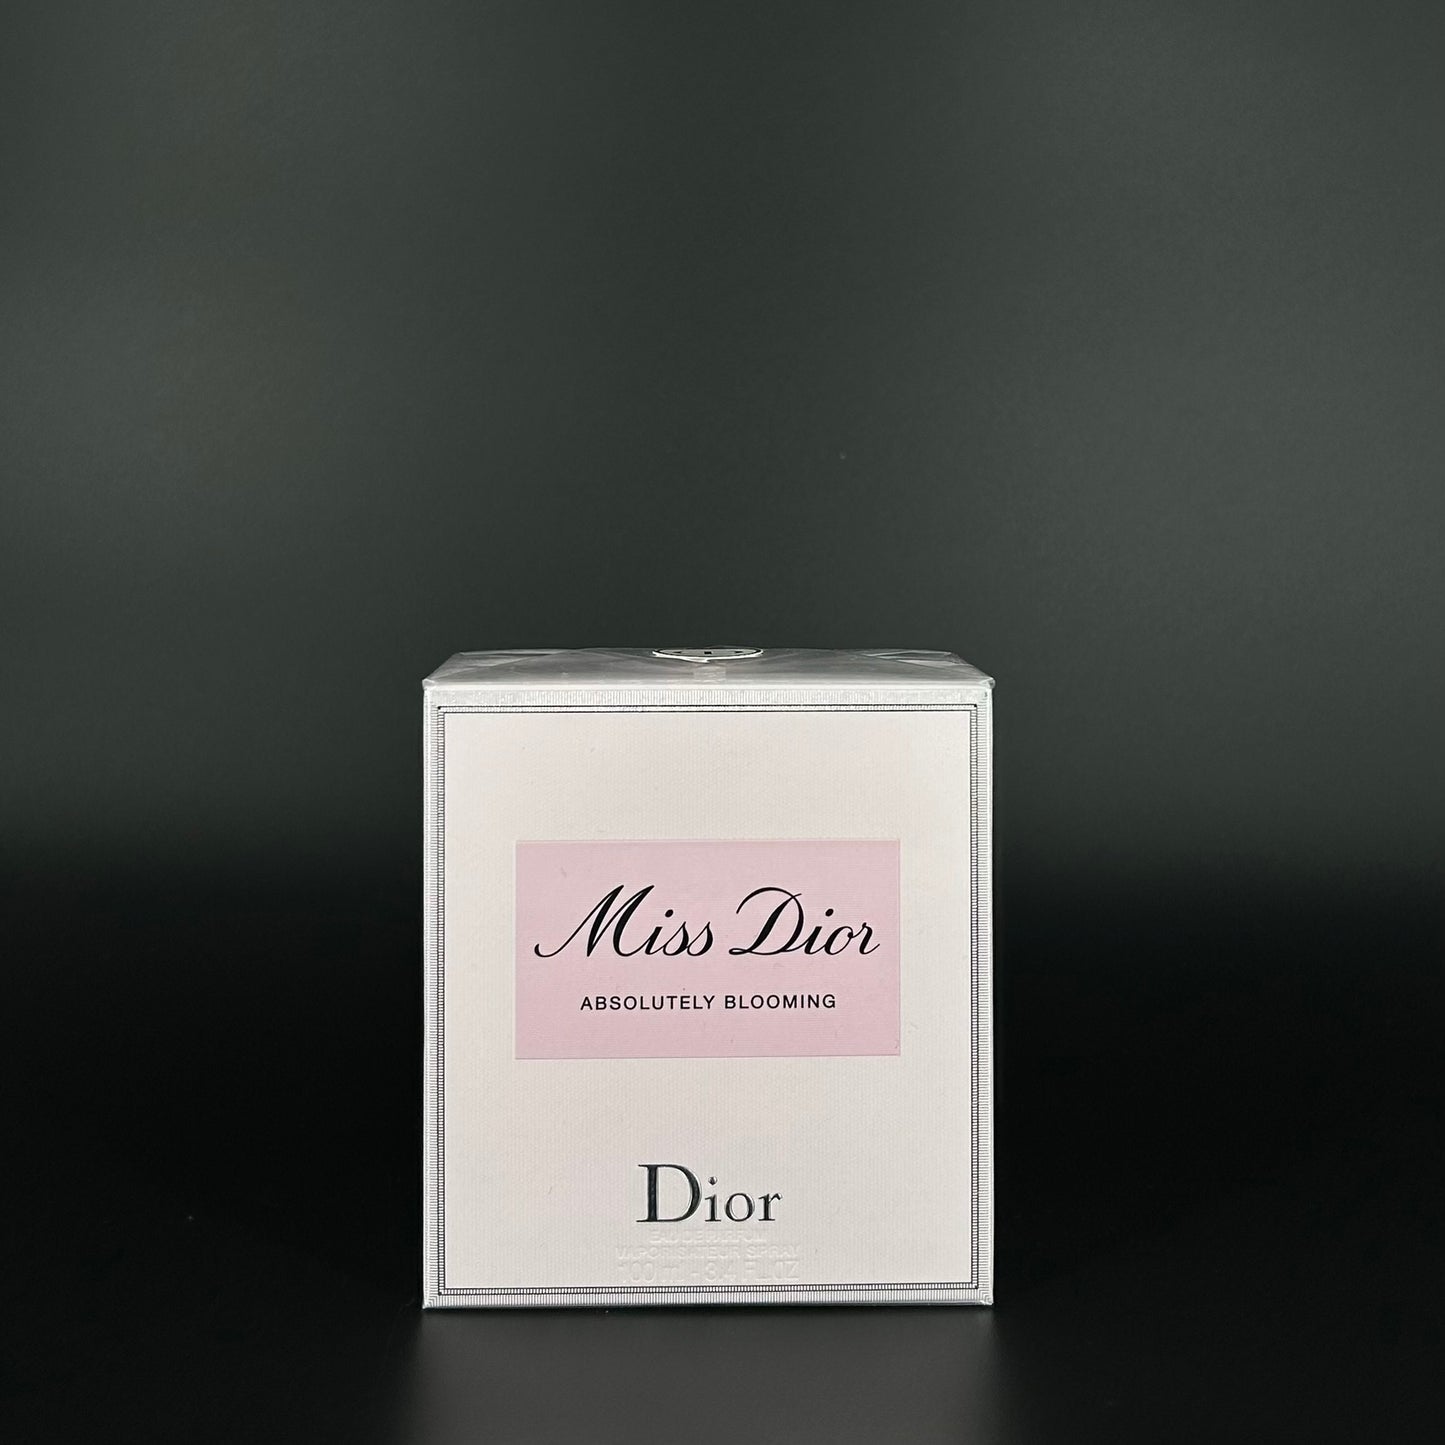 Dior Miss Dior Absolutely Blooming 100ml EDP